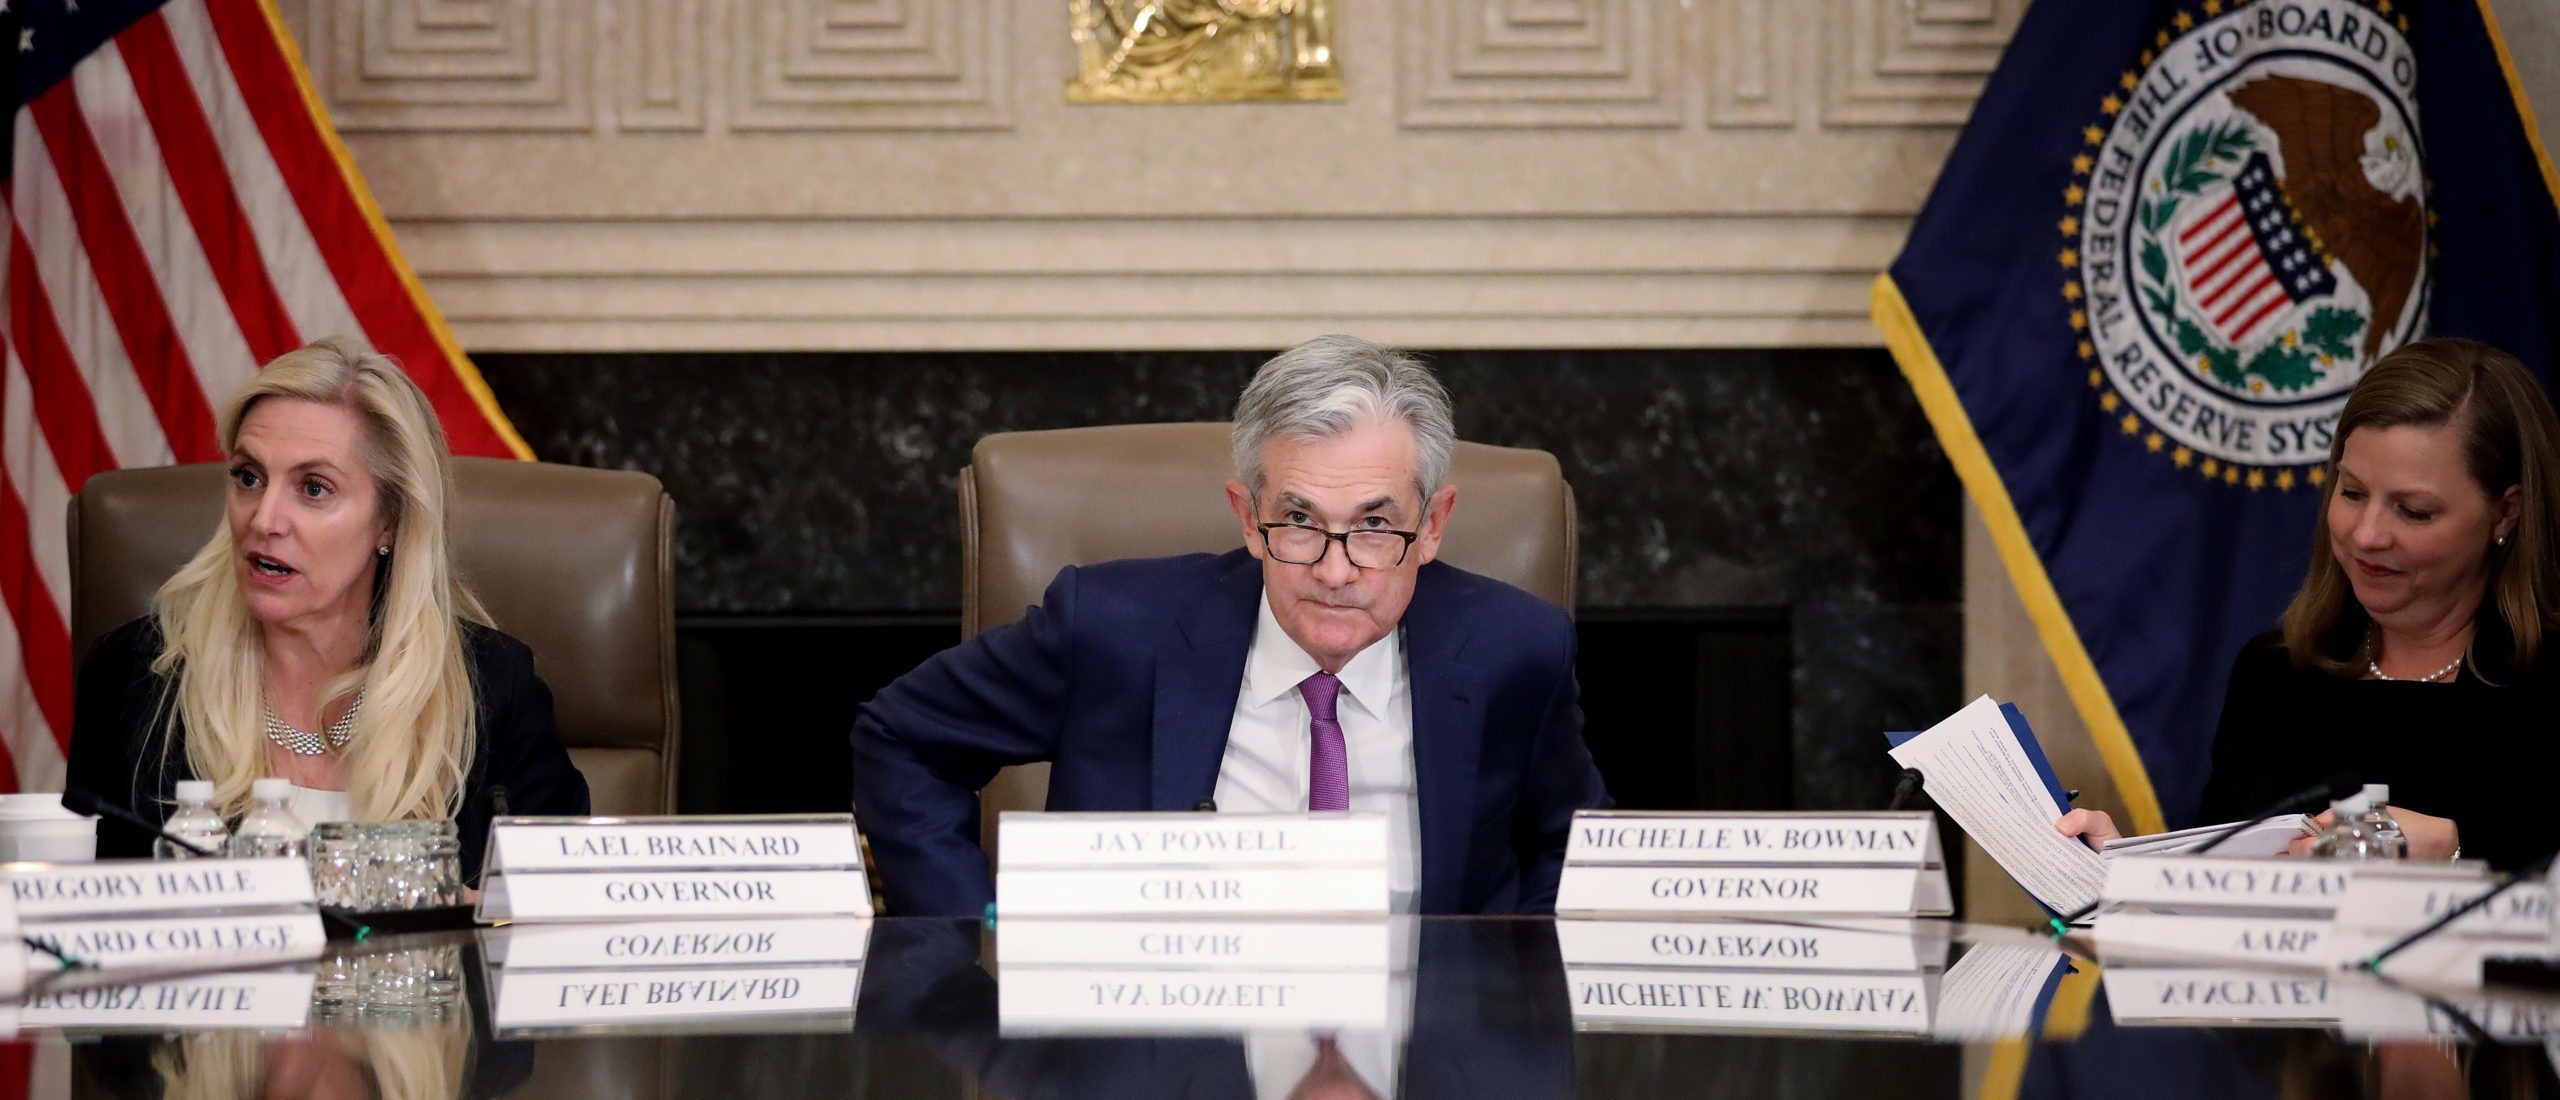 WASHINGTON, DC - OCTOBER 04: Federal Reserve Board Chairman Jerome Powell attends an event at the Federal Reserve headquarters October 4, 2019 in Washington, DC. Powell participated in a "Fed Listens" event on "Perspectives on Maximum Employment and Price Stability." (Photo by Win McNamee/Getty Images)